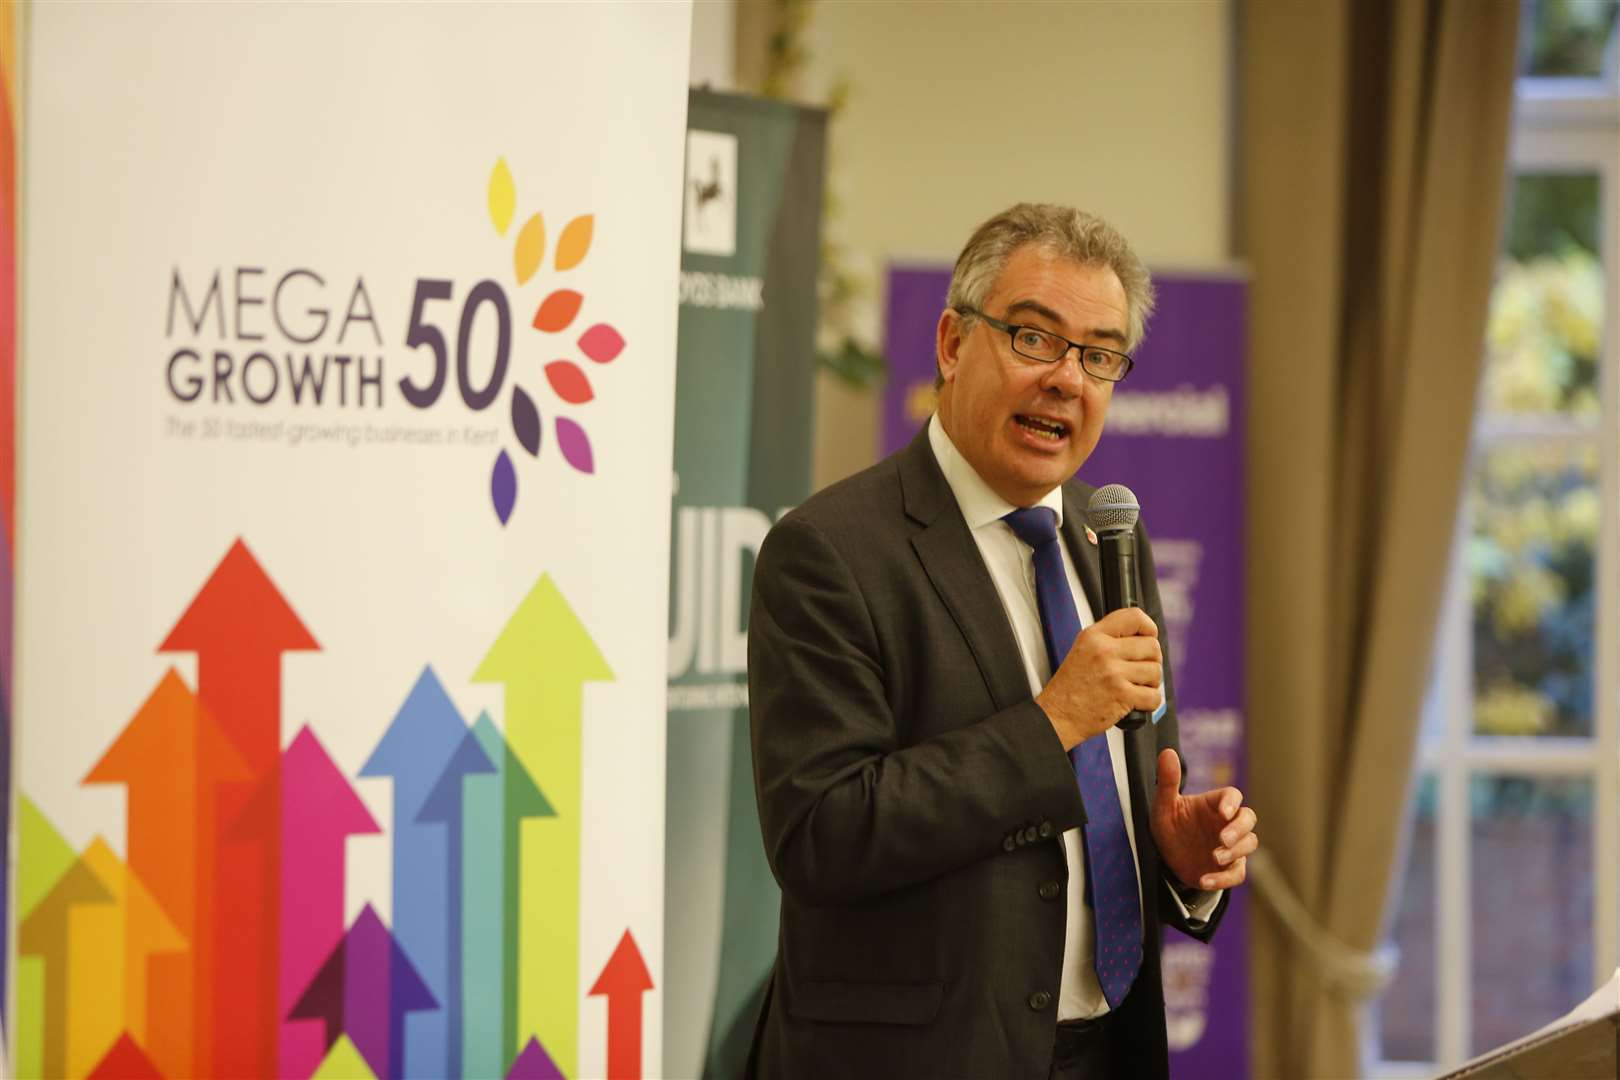 Andrew Griggs of Kreston Reeves at the unveiling of the MegaGrowth 50 2018 list